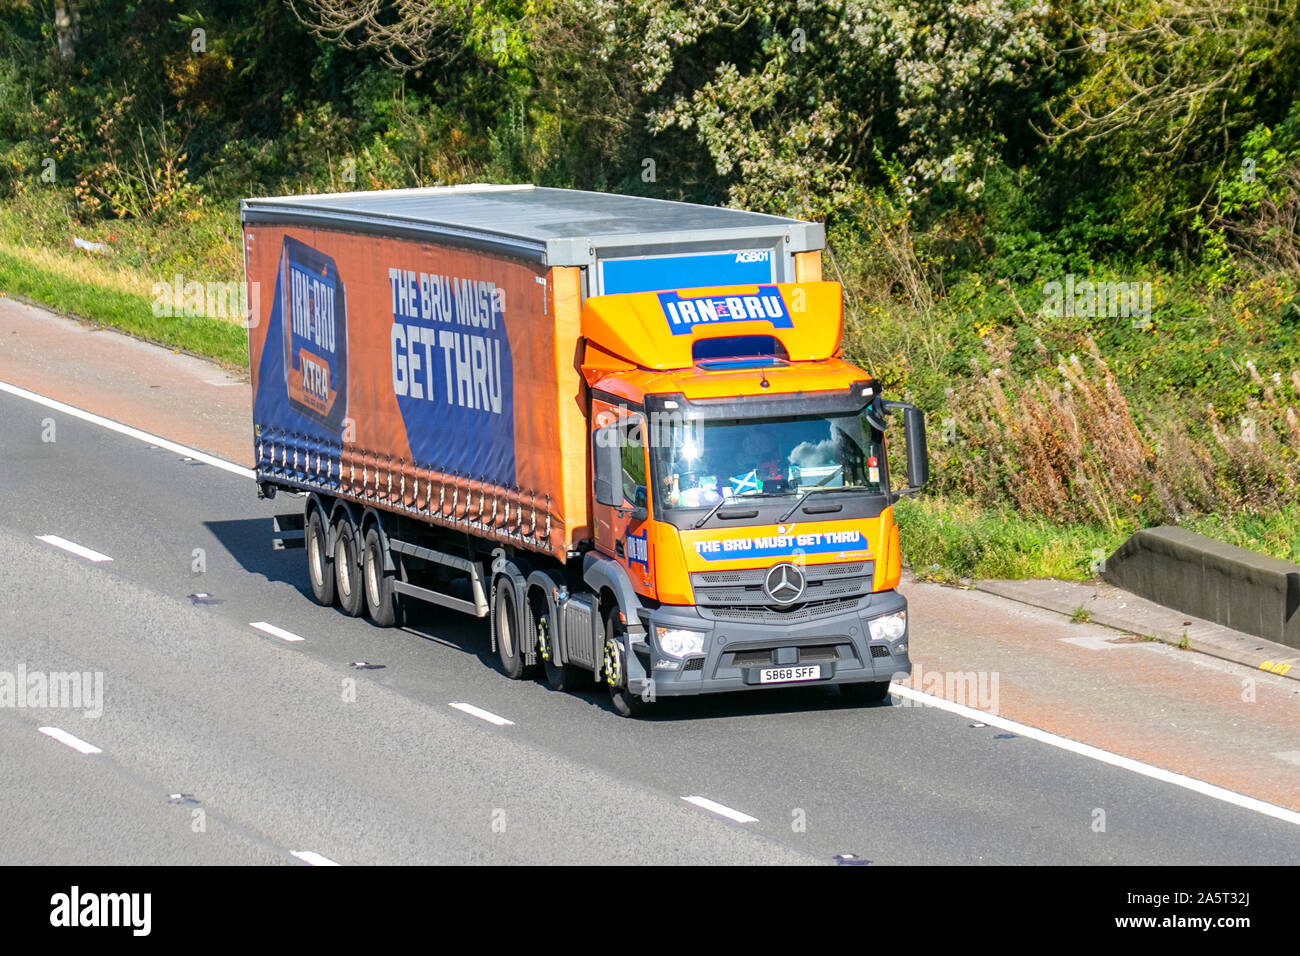 IRN BRU must get thru Haulage delivery trucks, lorry, transportation, truck, cargo, Mercedes Benz vehicle, food delivery, commercial transport, drinks industry, supply chain freight, on the M6 at Lancaster, UK Stock Photo